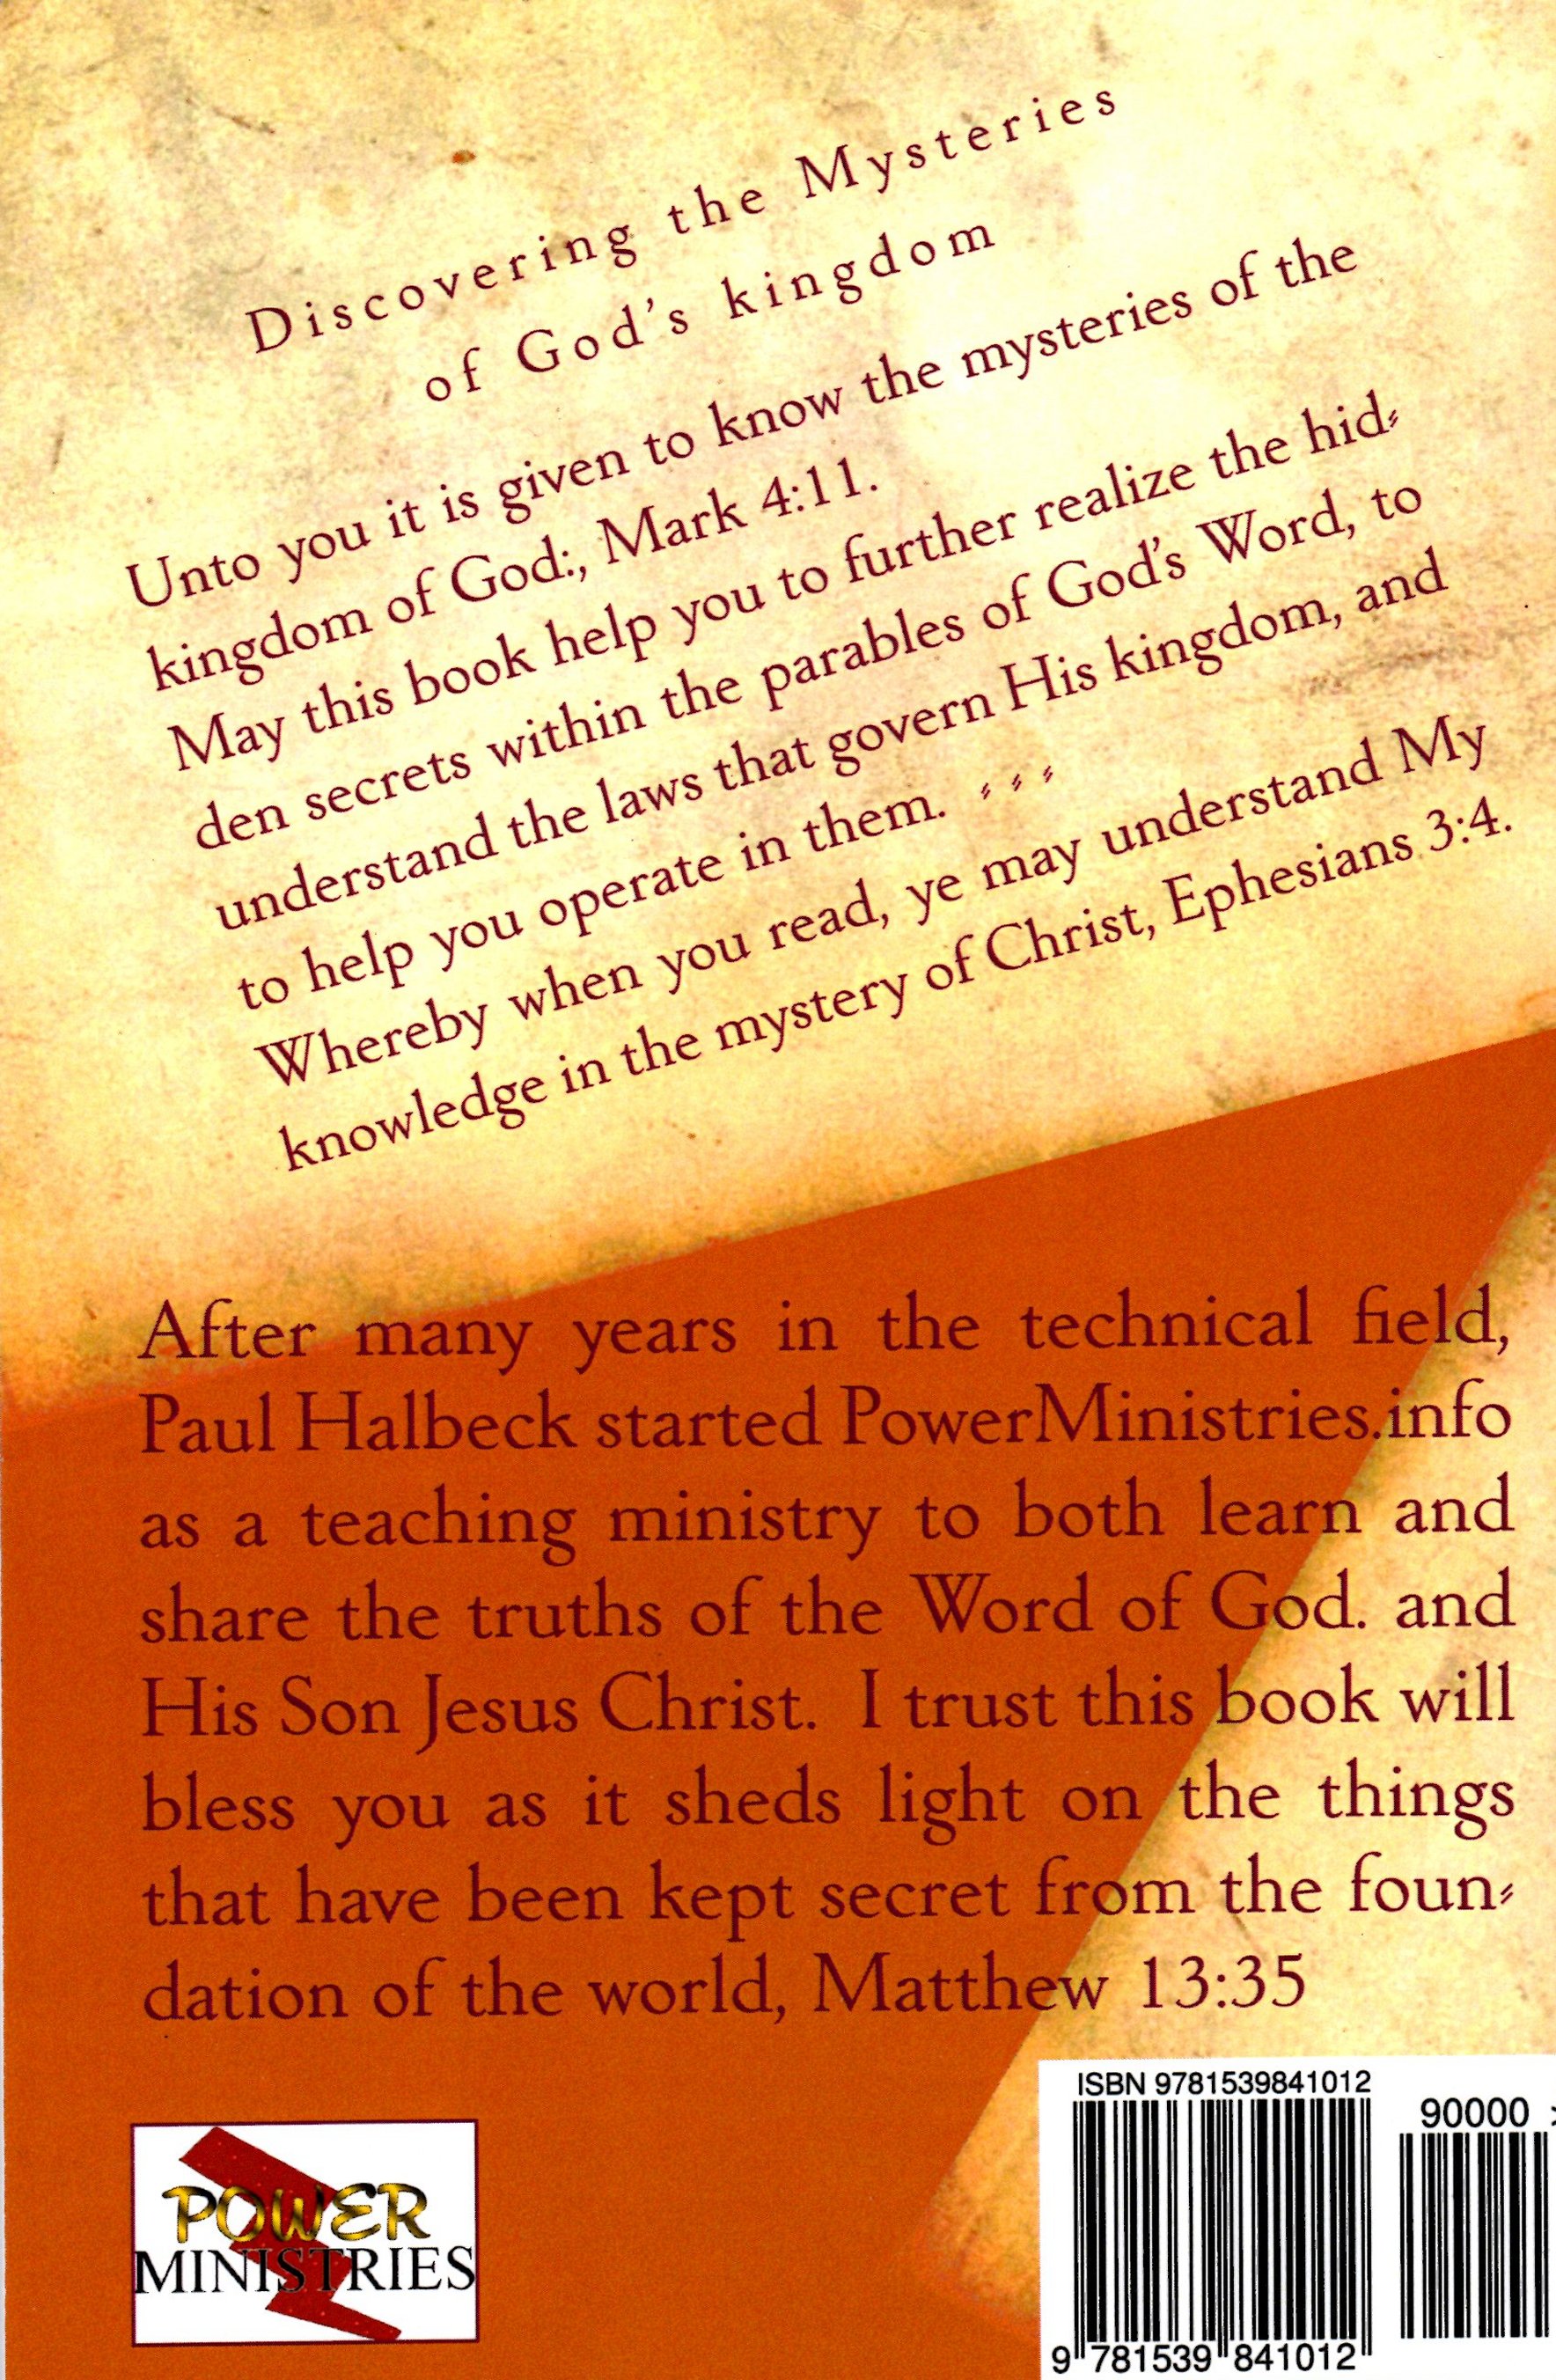 Parables in the Bible, back cover